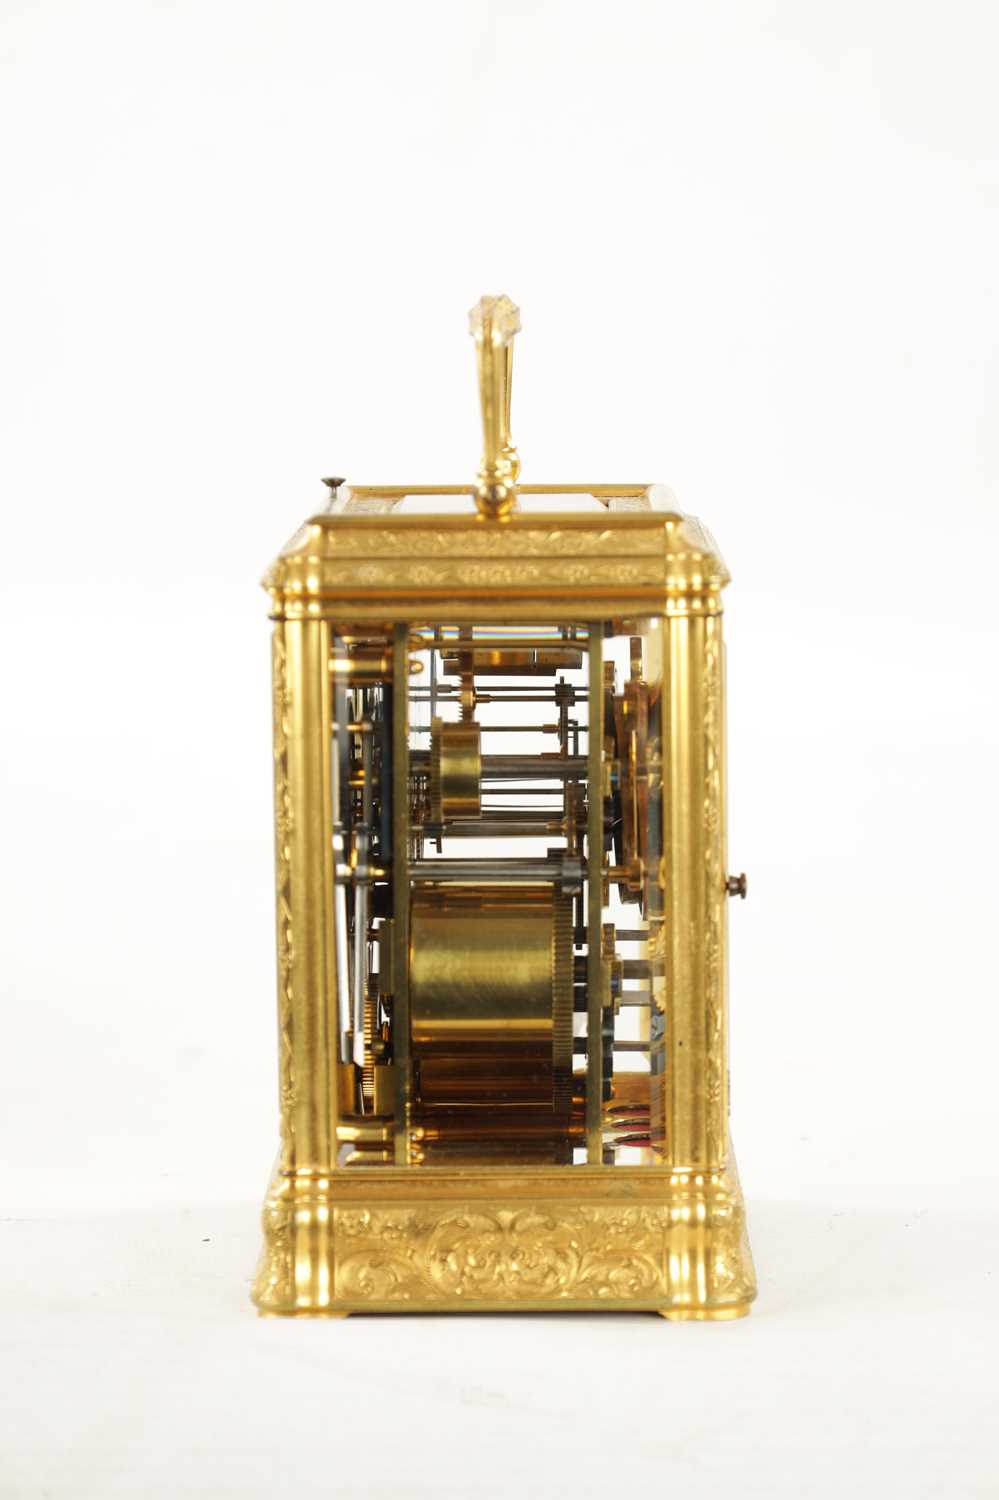 HENRI JACOT, PARIS. A LATE 19TH CENTURY FRENCH GRAND SONNERIE CARRIAGE CLOCK - Image 6 of 20